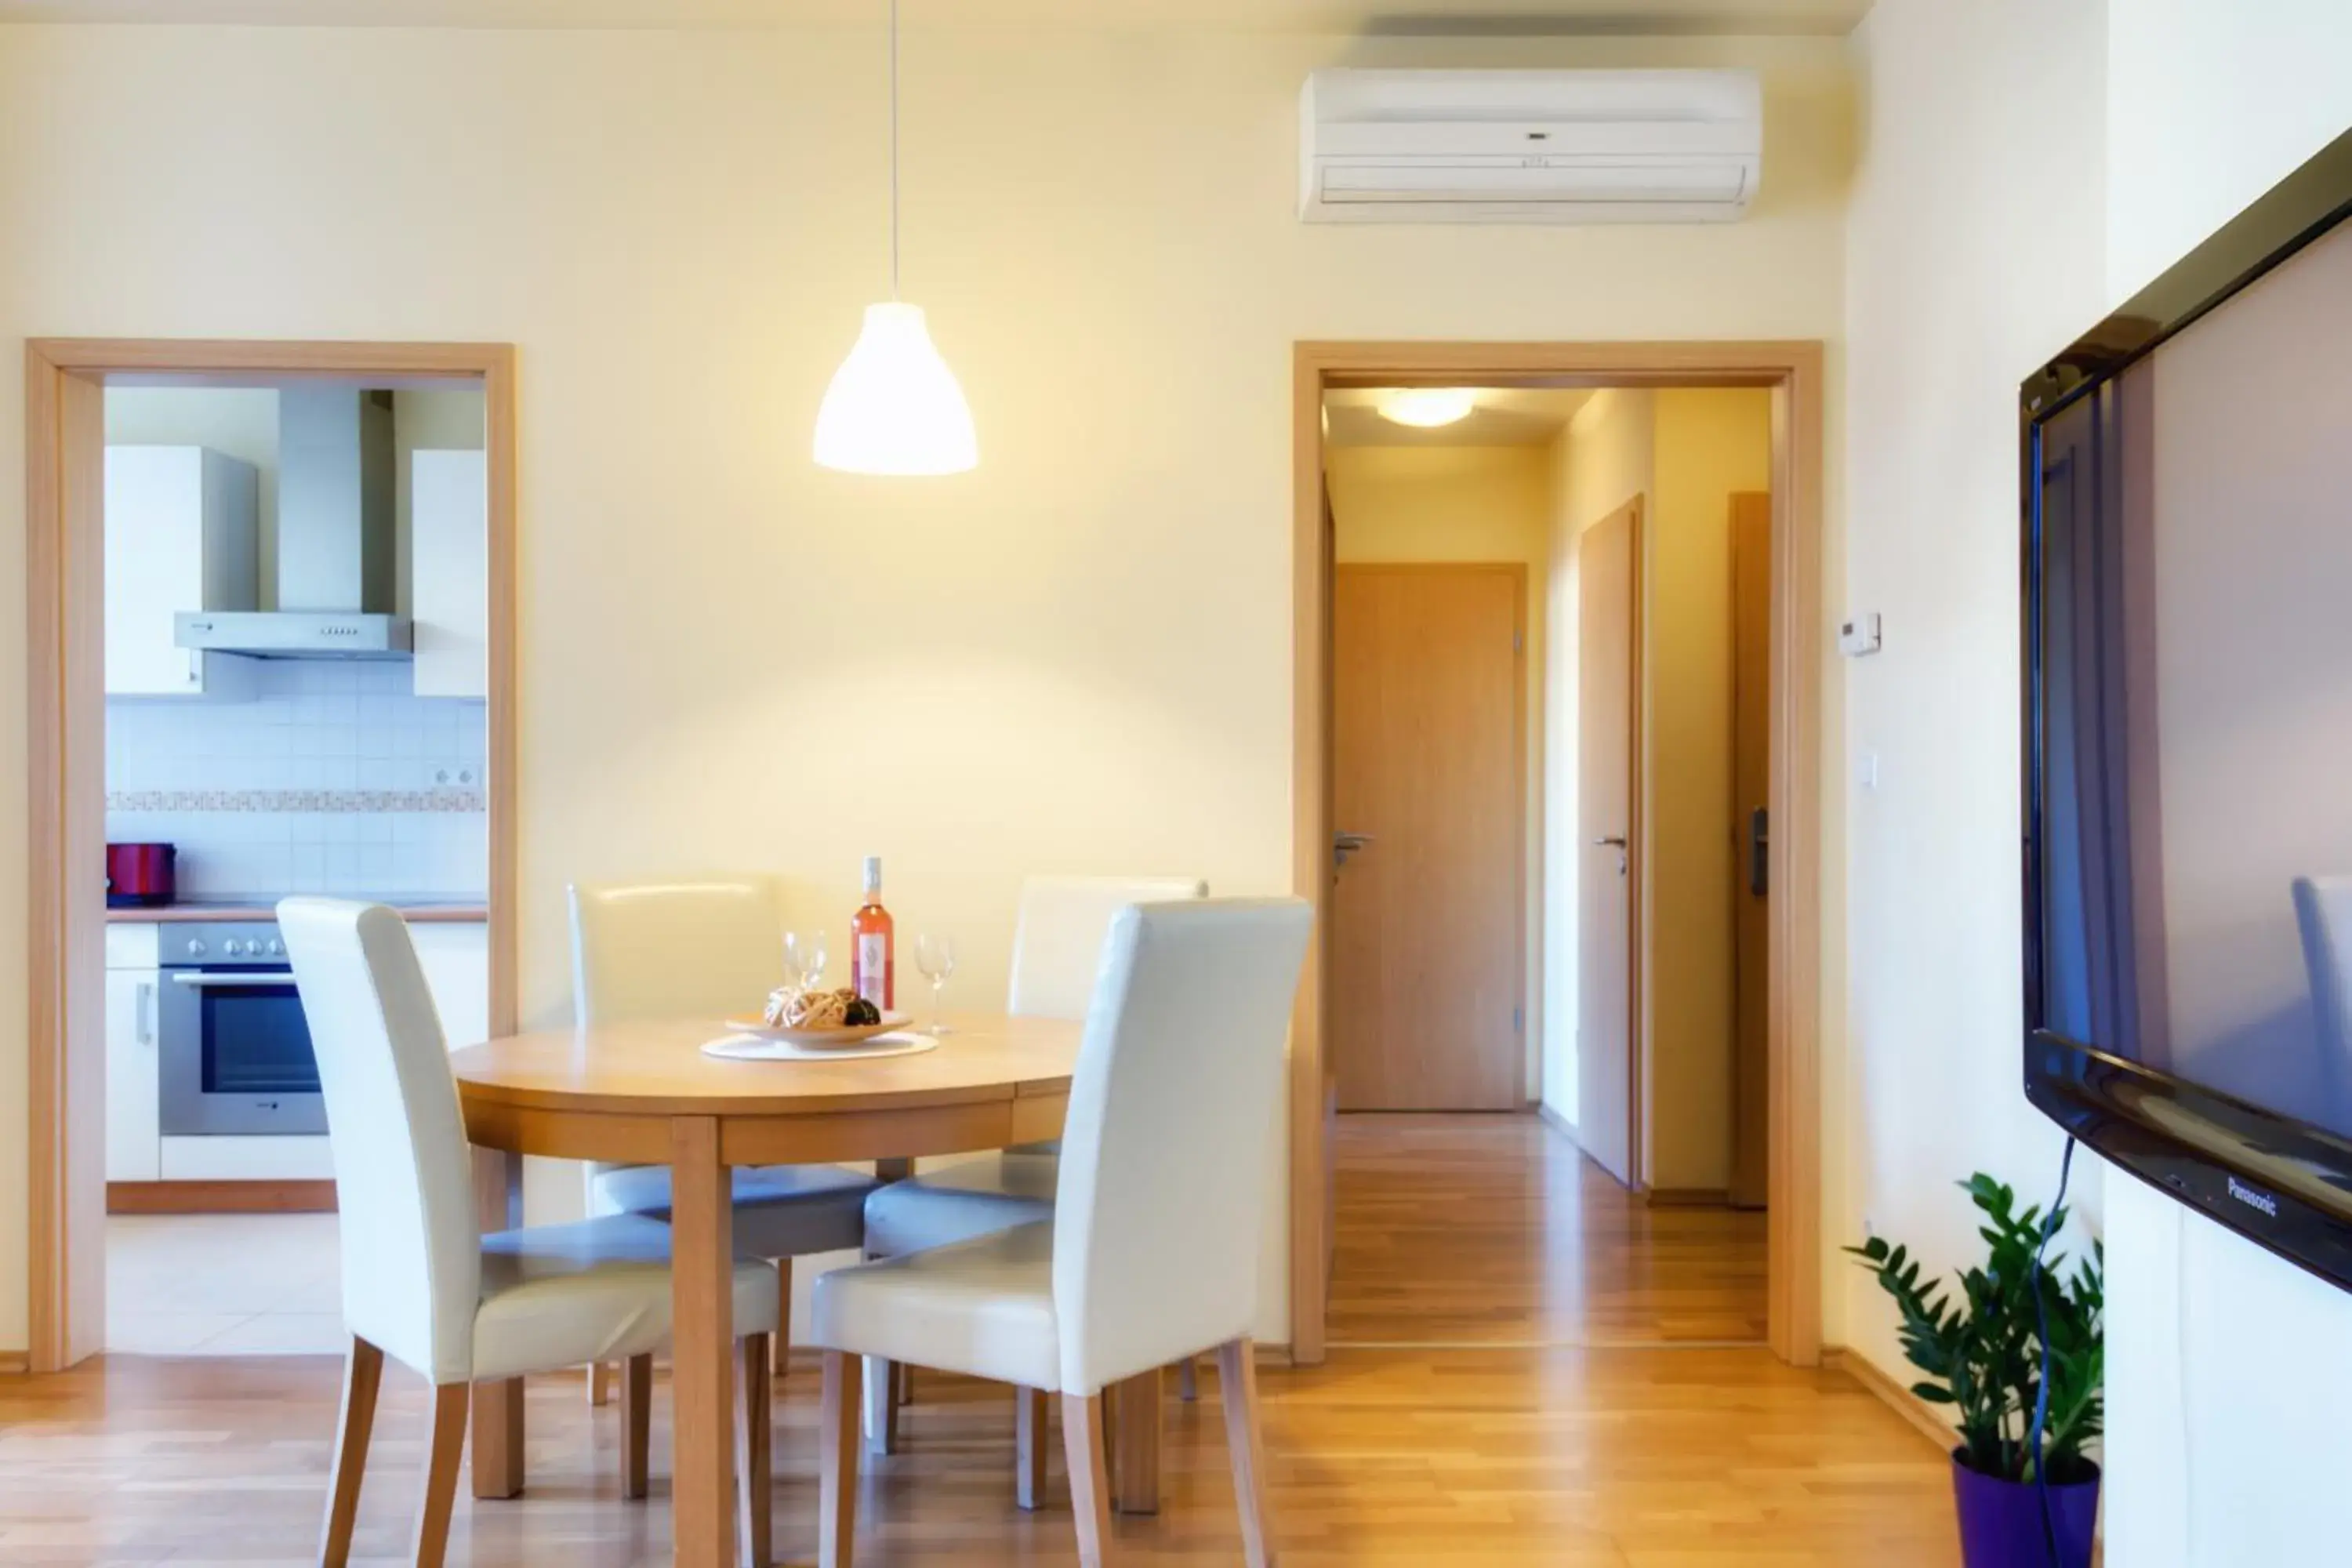 Dining Area in Trendy Deluxe Apartments